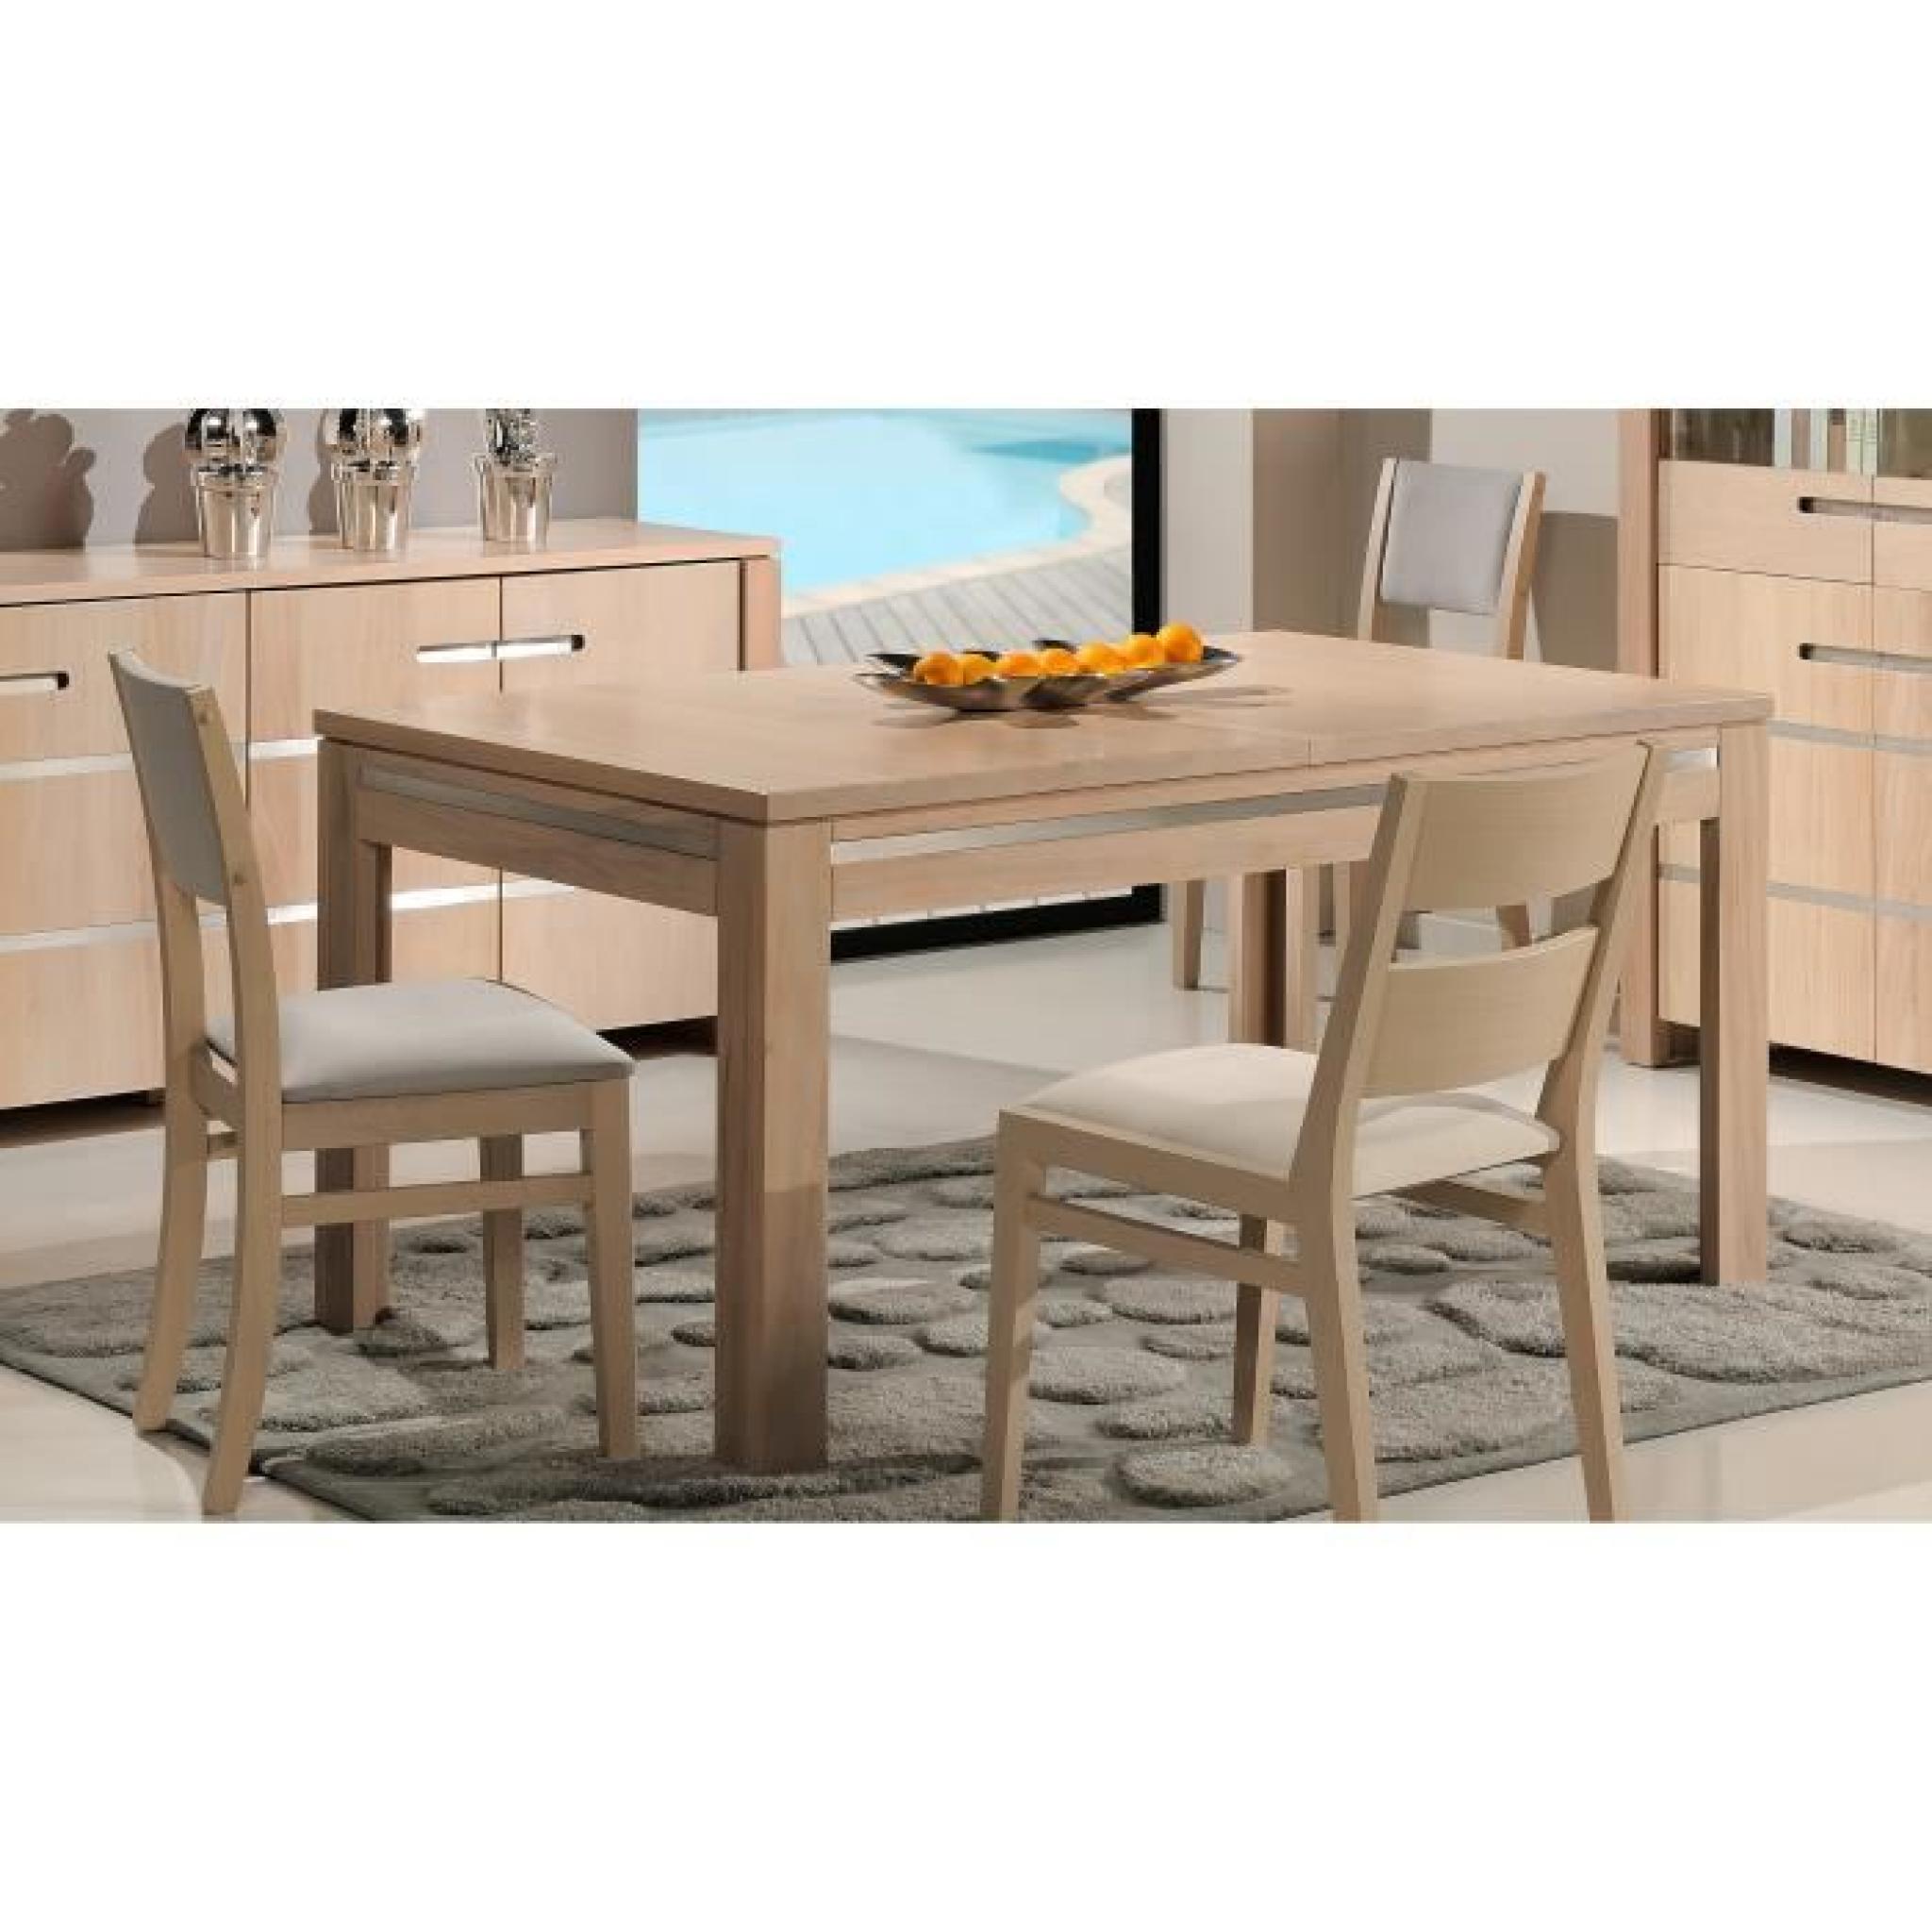 Table OPALE 180/95 ORME MASSIF-INOX (Orme - Naturel)